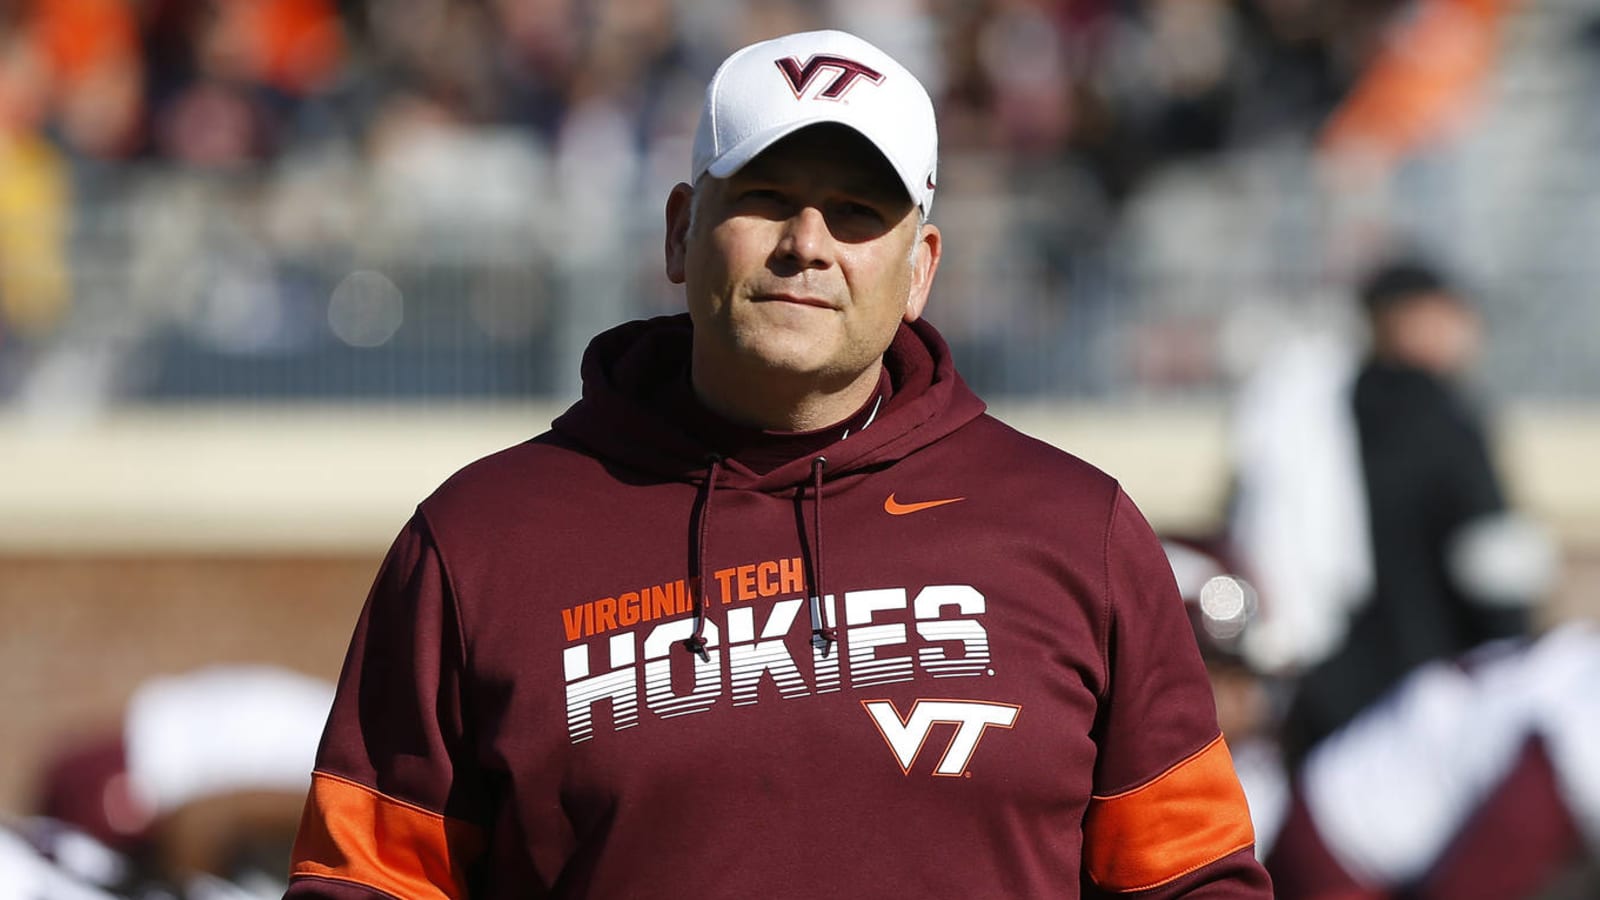 Virginia Tech loses after trying to ice kicker